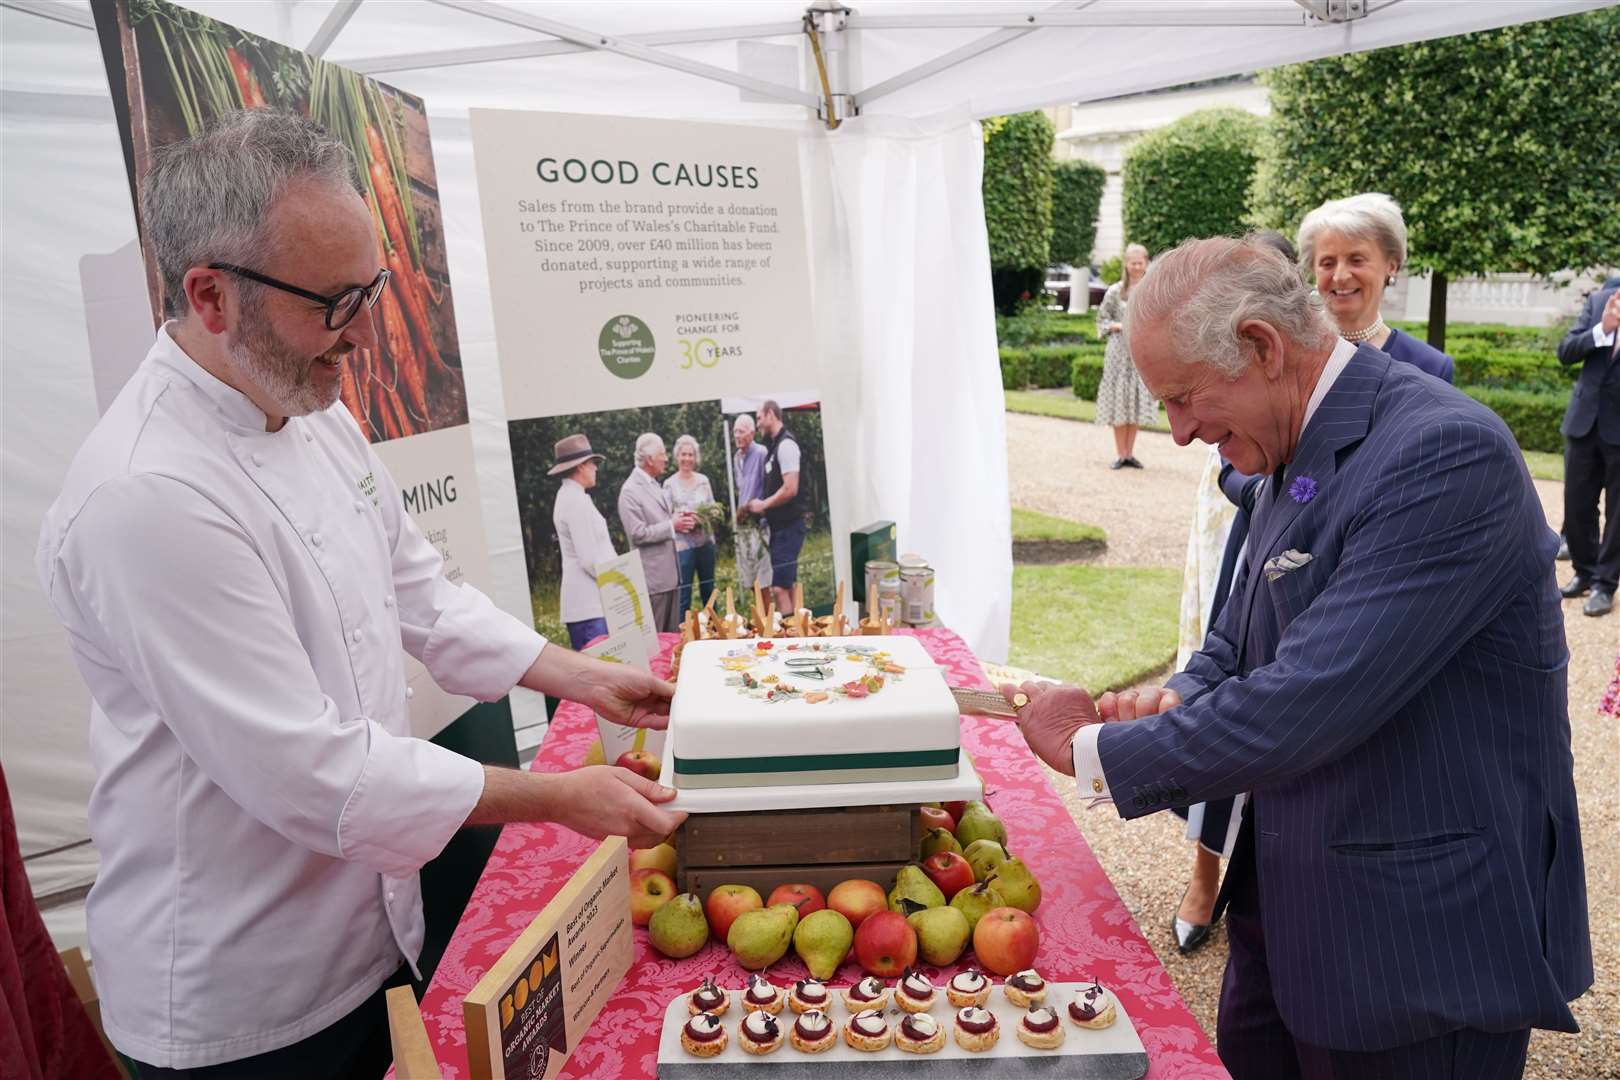 The King cuts a cake to celebrate four decades of the Prince of Wales’s Charitable Fund, with Waitrose senior chef Will Torrent, during a reception at Clarence House (Jonathan Brady/PA)